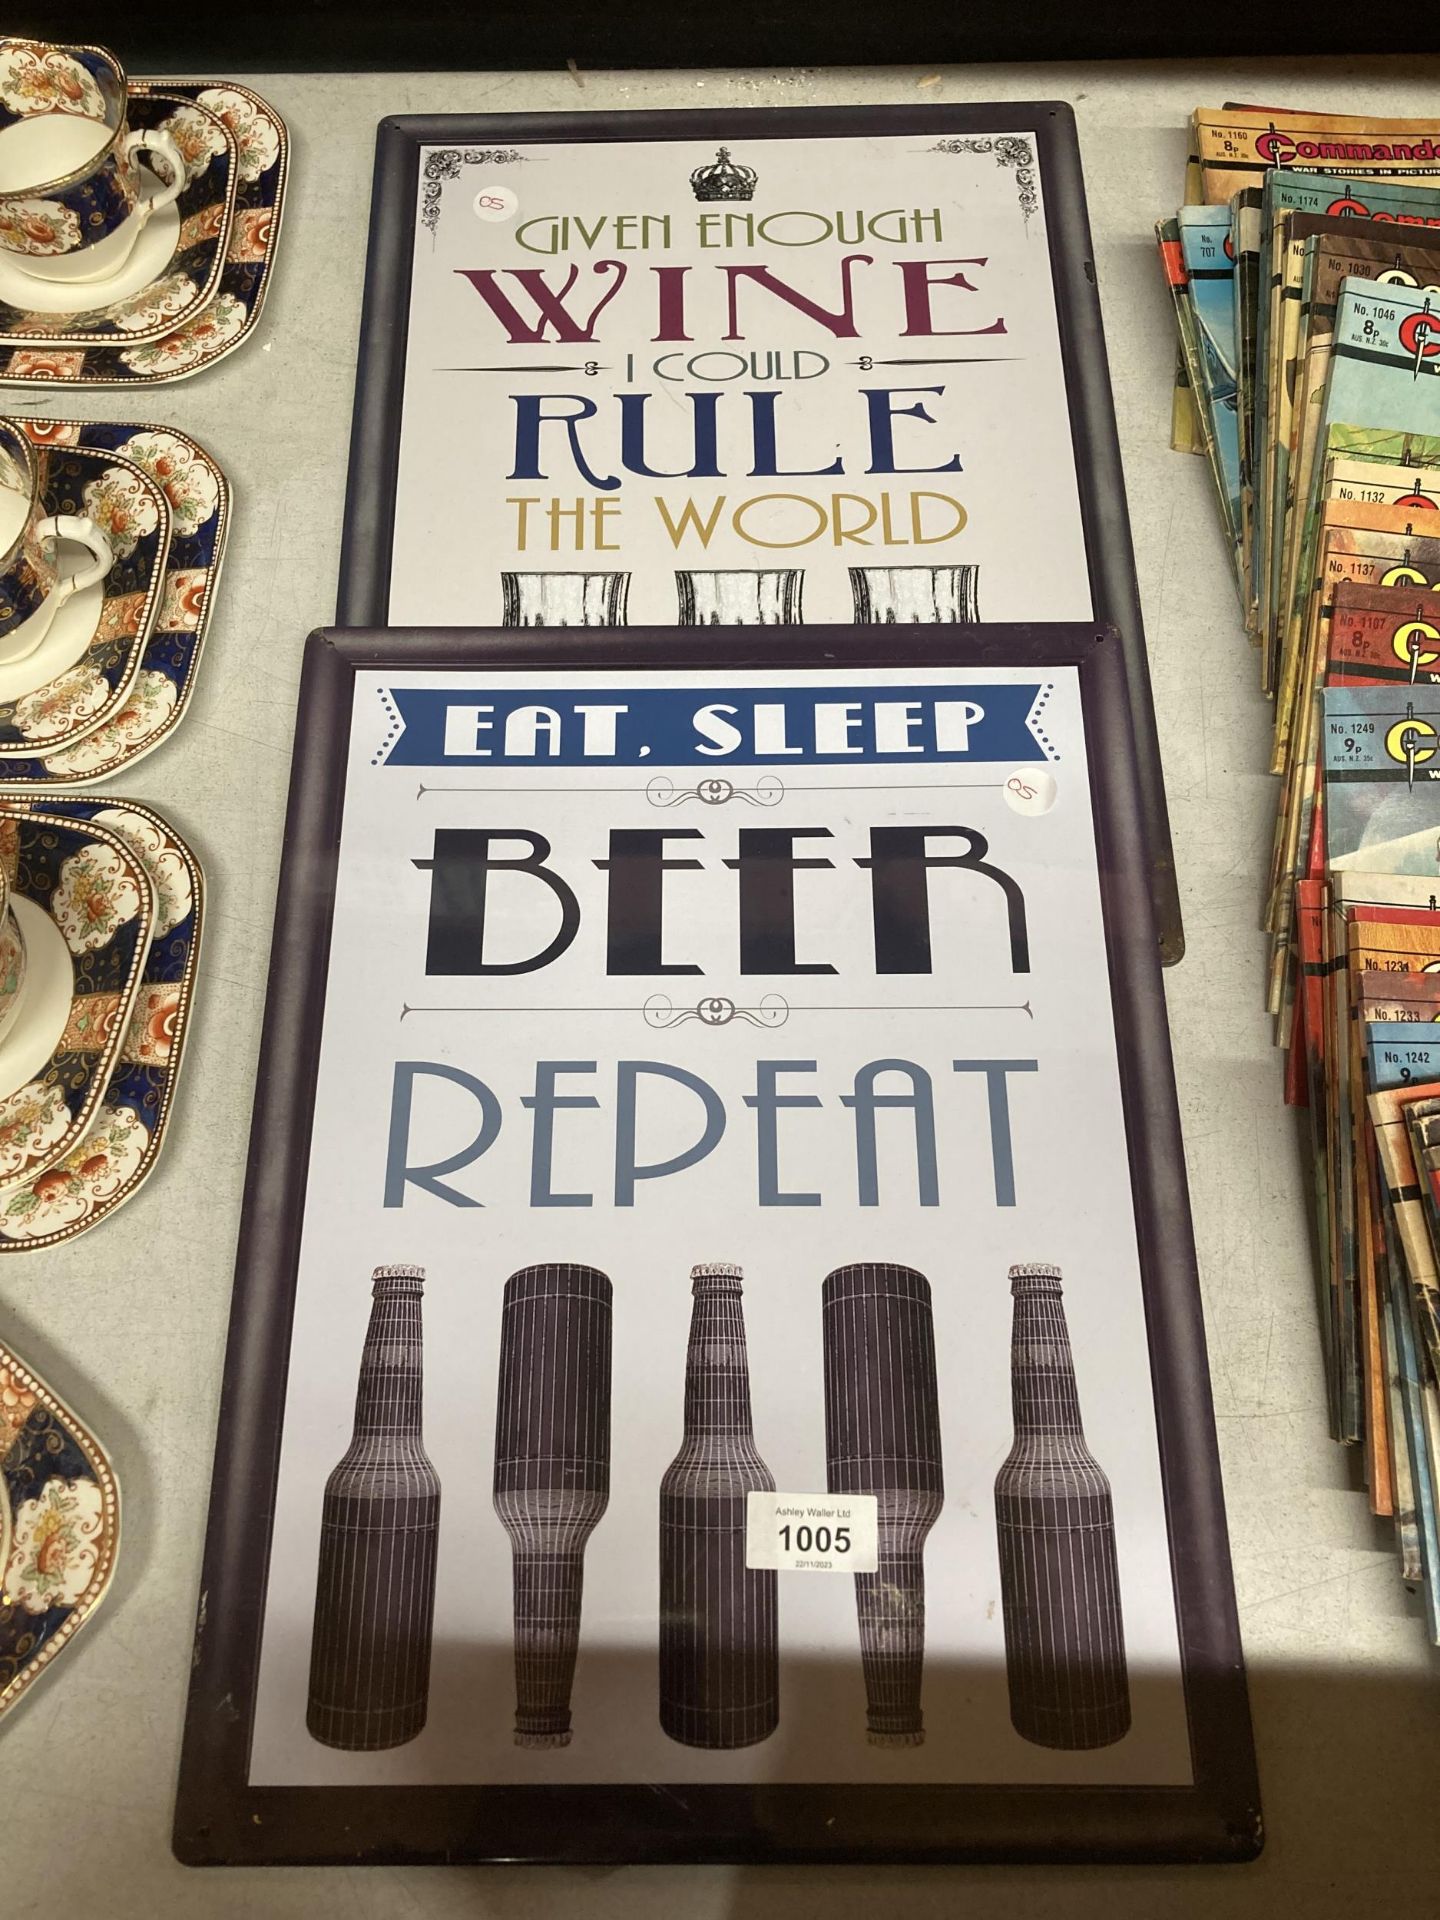 TWO METAL SIGNS, 'EAT, SLEEP, BEER, REPEAT' AND 'GIVEN ENOUGH WINE I COULD RULE THE WORLD', 30CM X